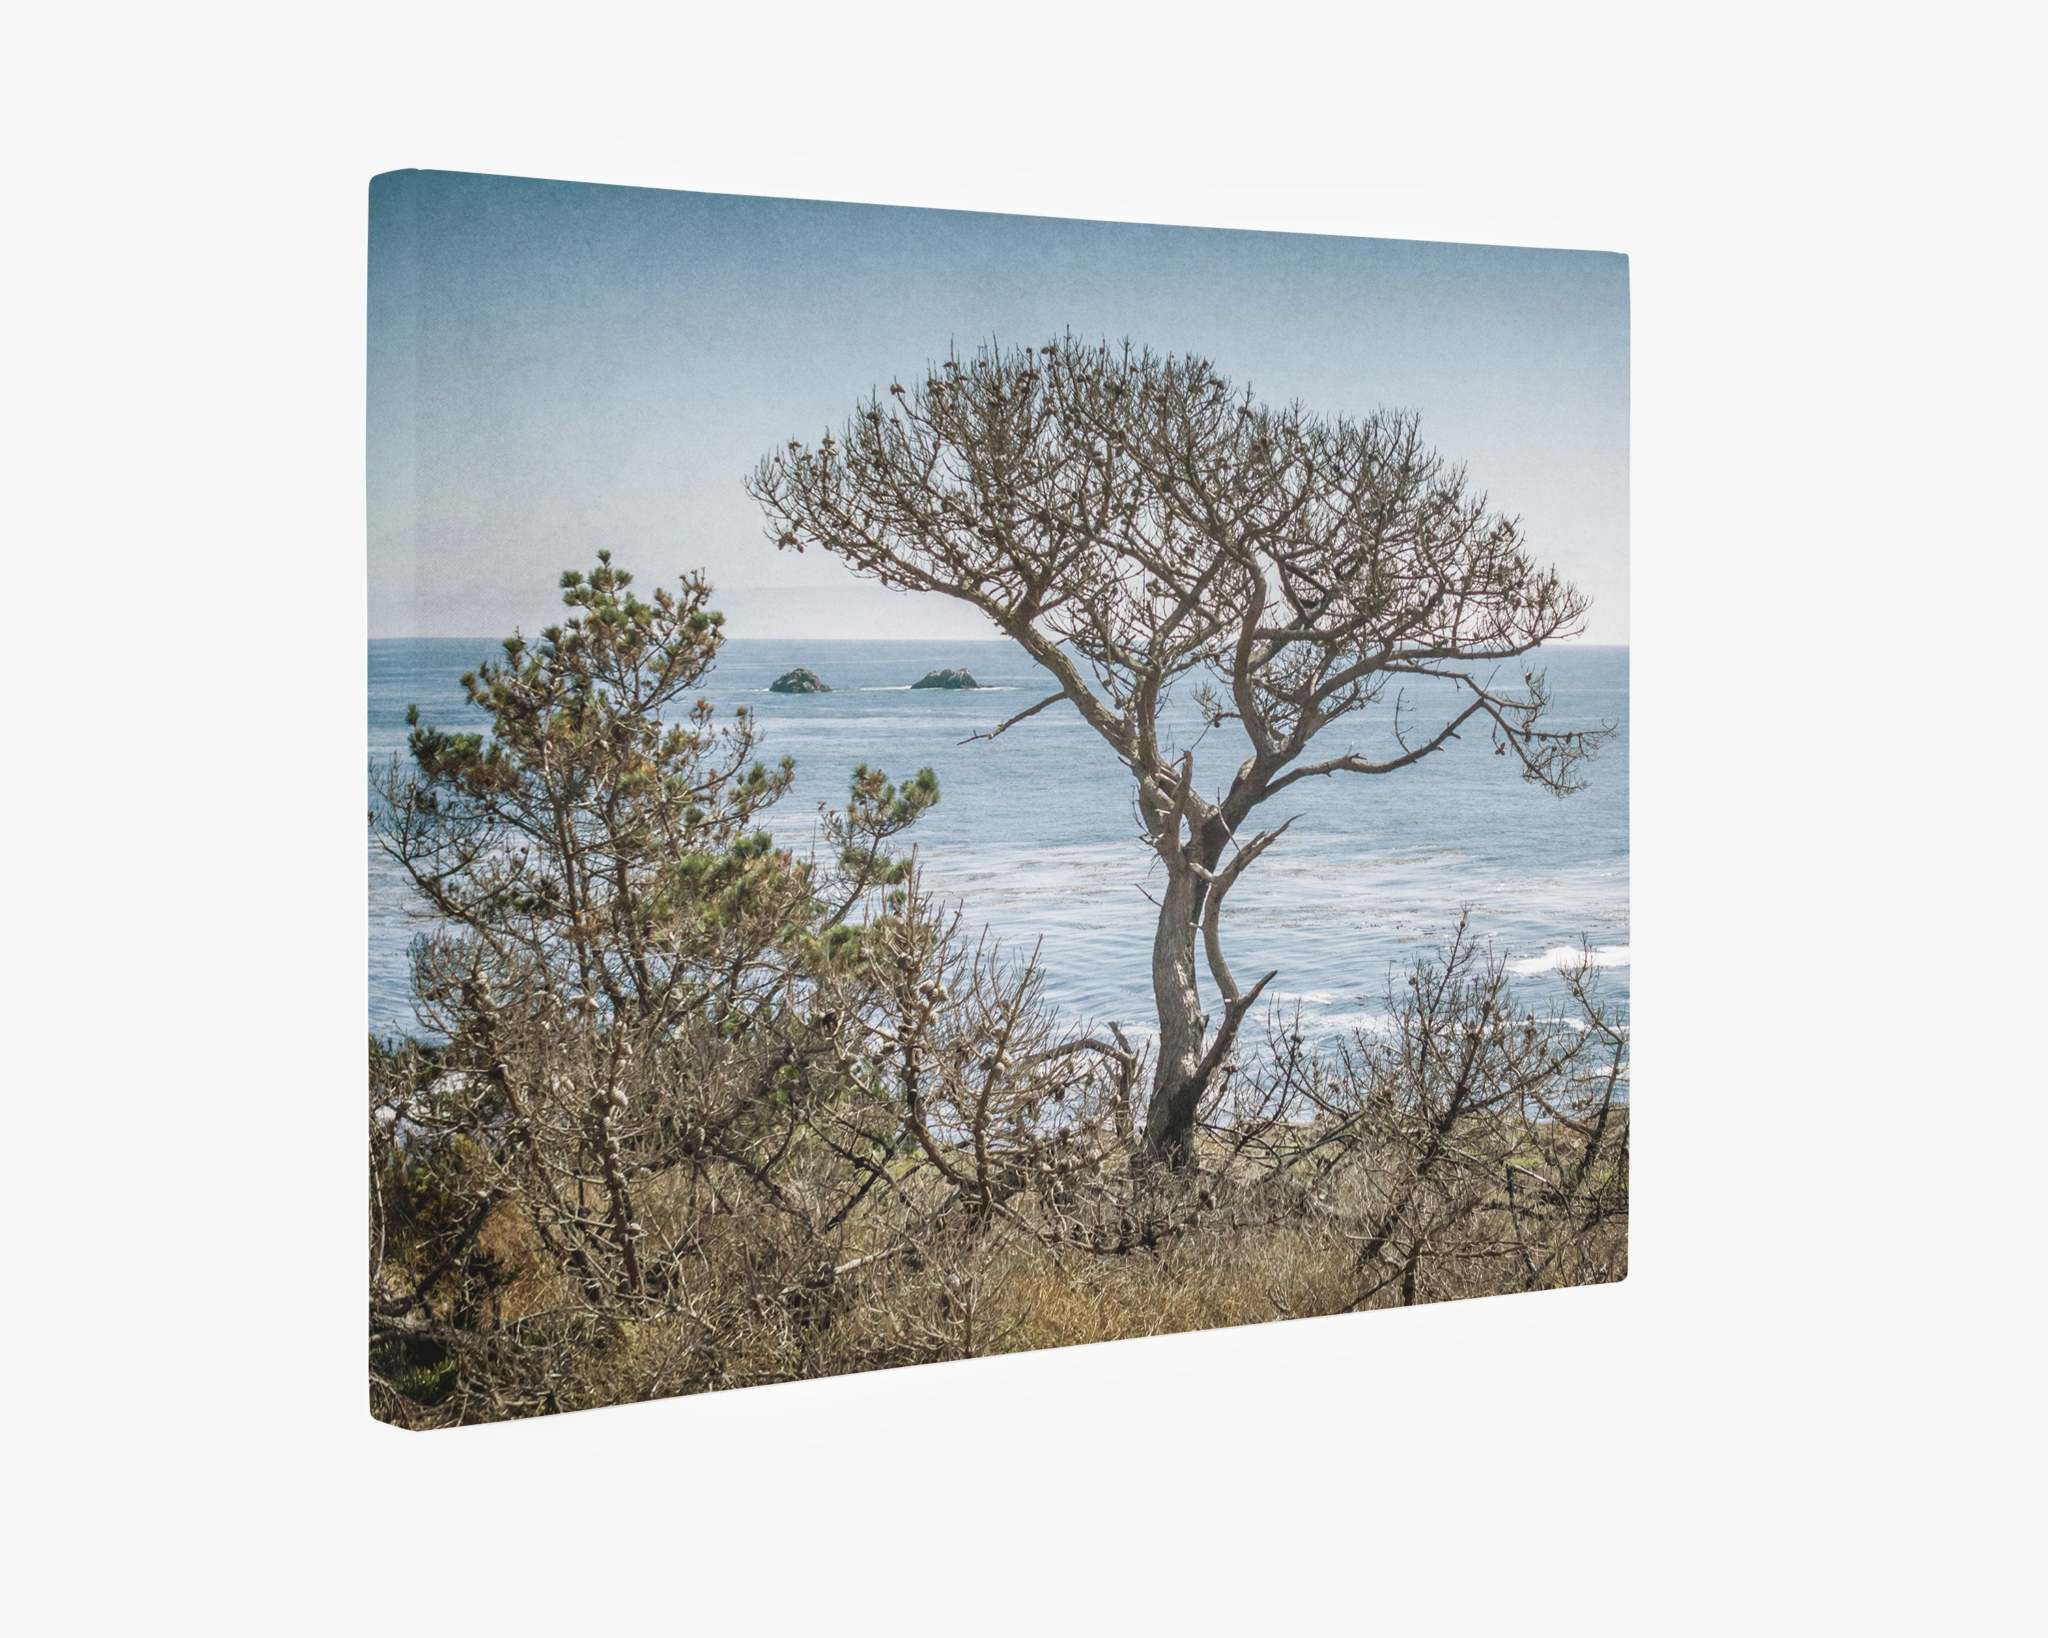 The Offley Green California Landscape Canvas Art in Big Sur, 'Wind Blown Tree' depicts a serene coastal scene along the Big Sur coastline with a tall, leafless tree in the foreground. The ocean stretches out behind it under a clear blue sky, with rocky outcrops visible in the distance and sparse vegetation surrounding the area.